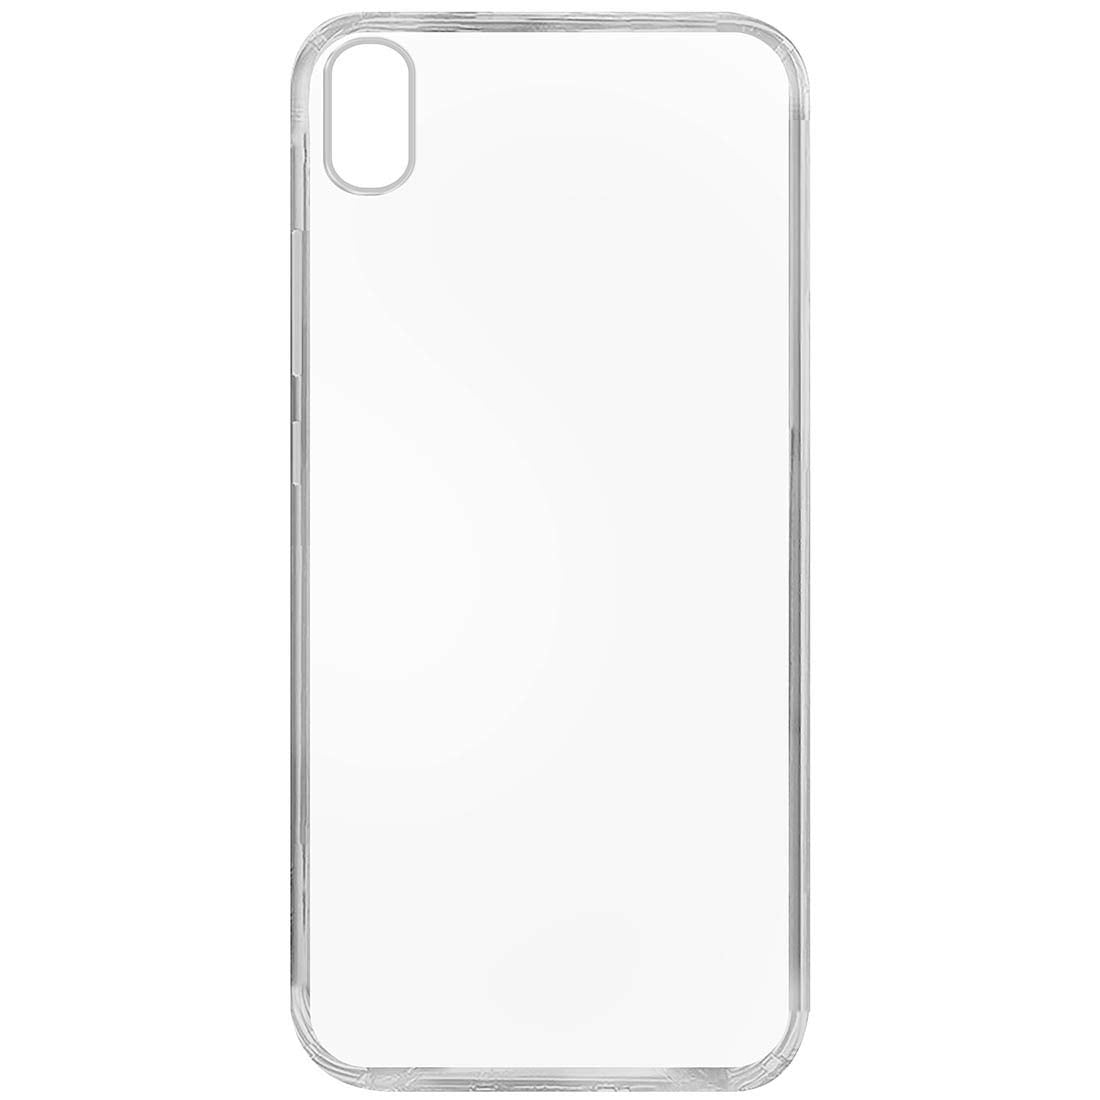 Clear Case for Tecno i5 Pro